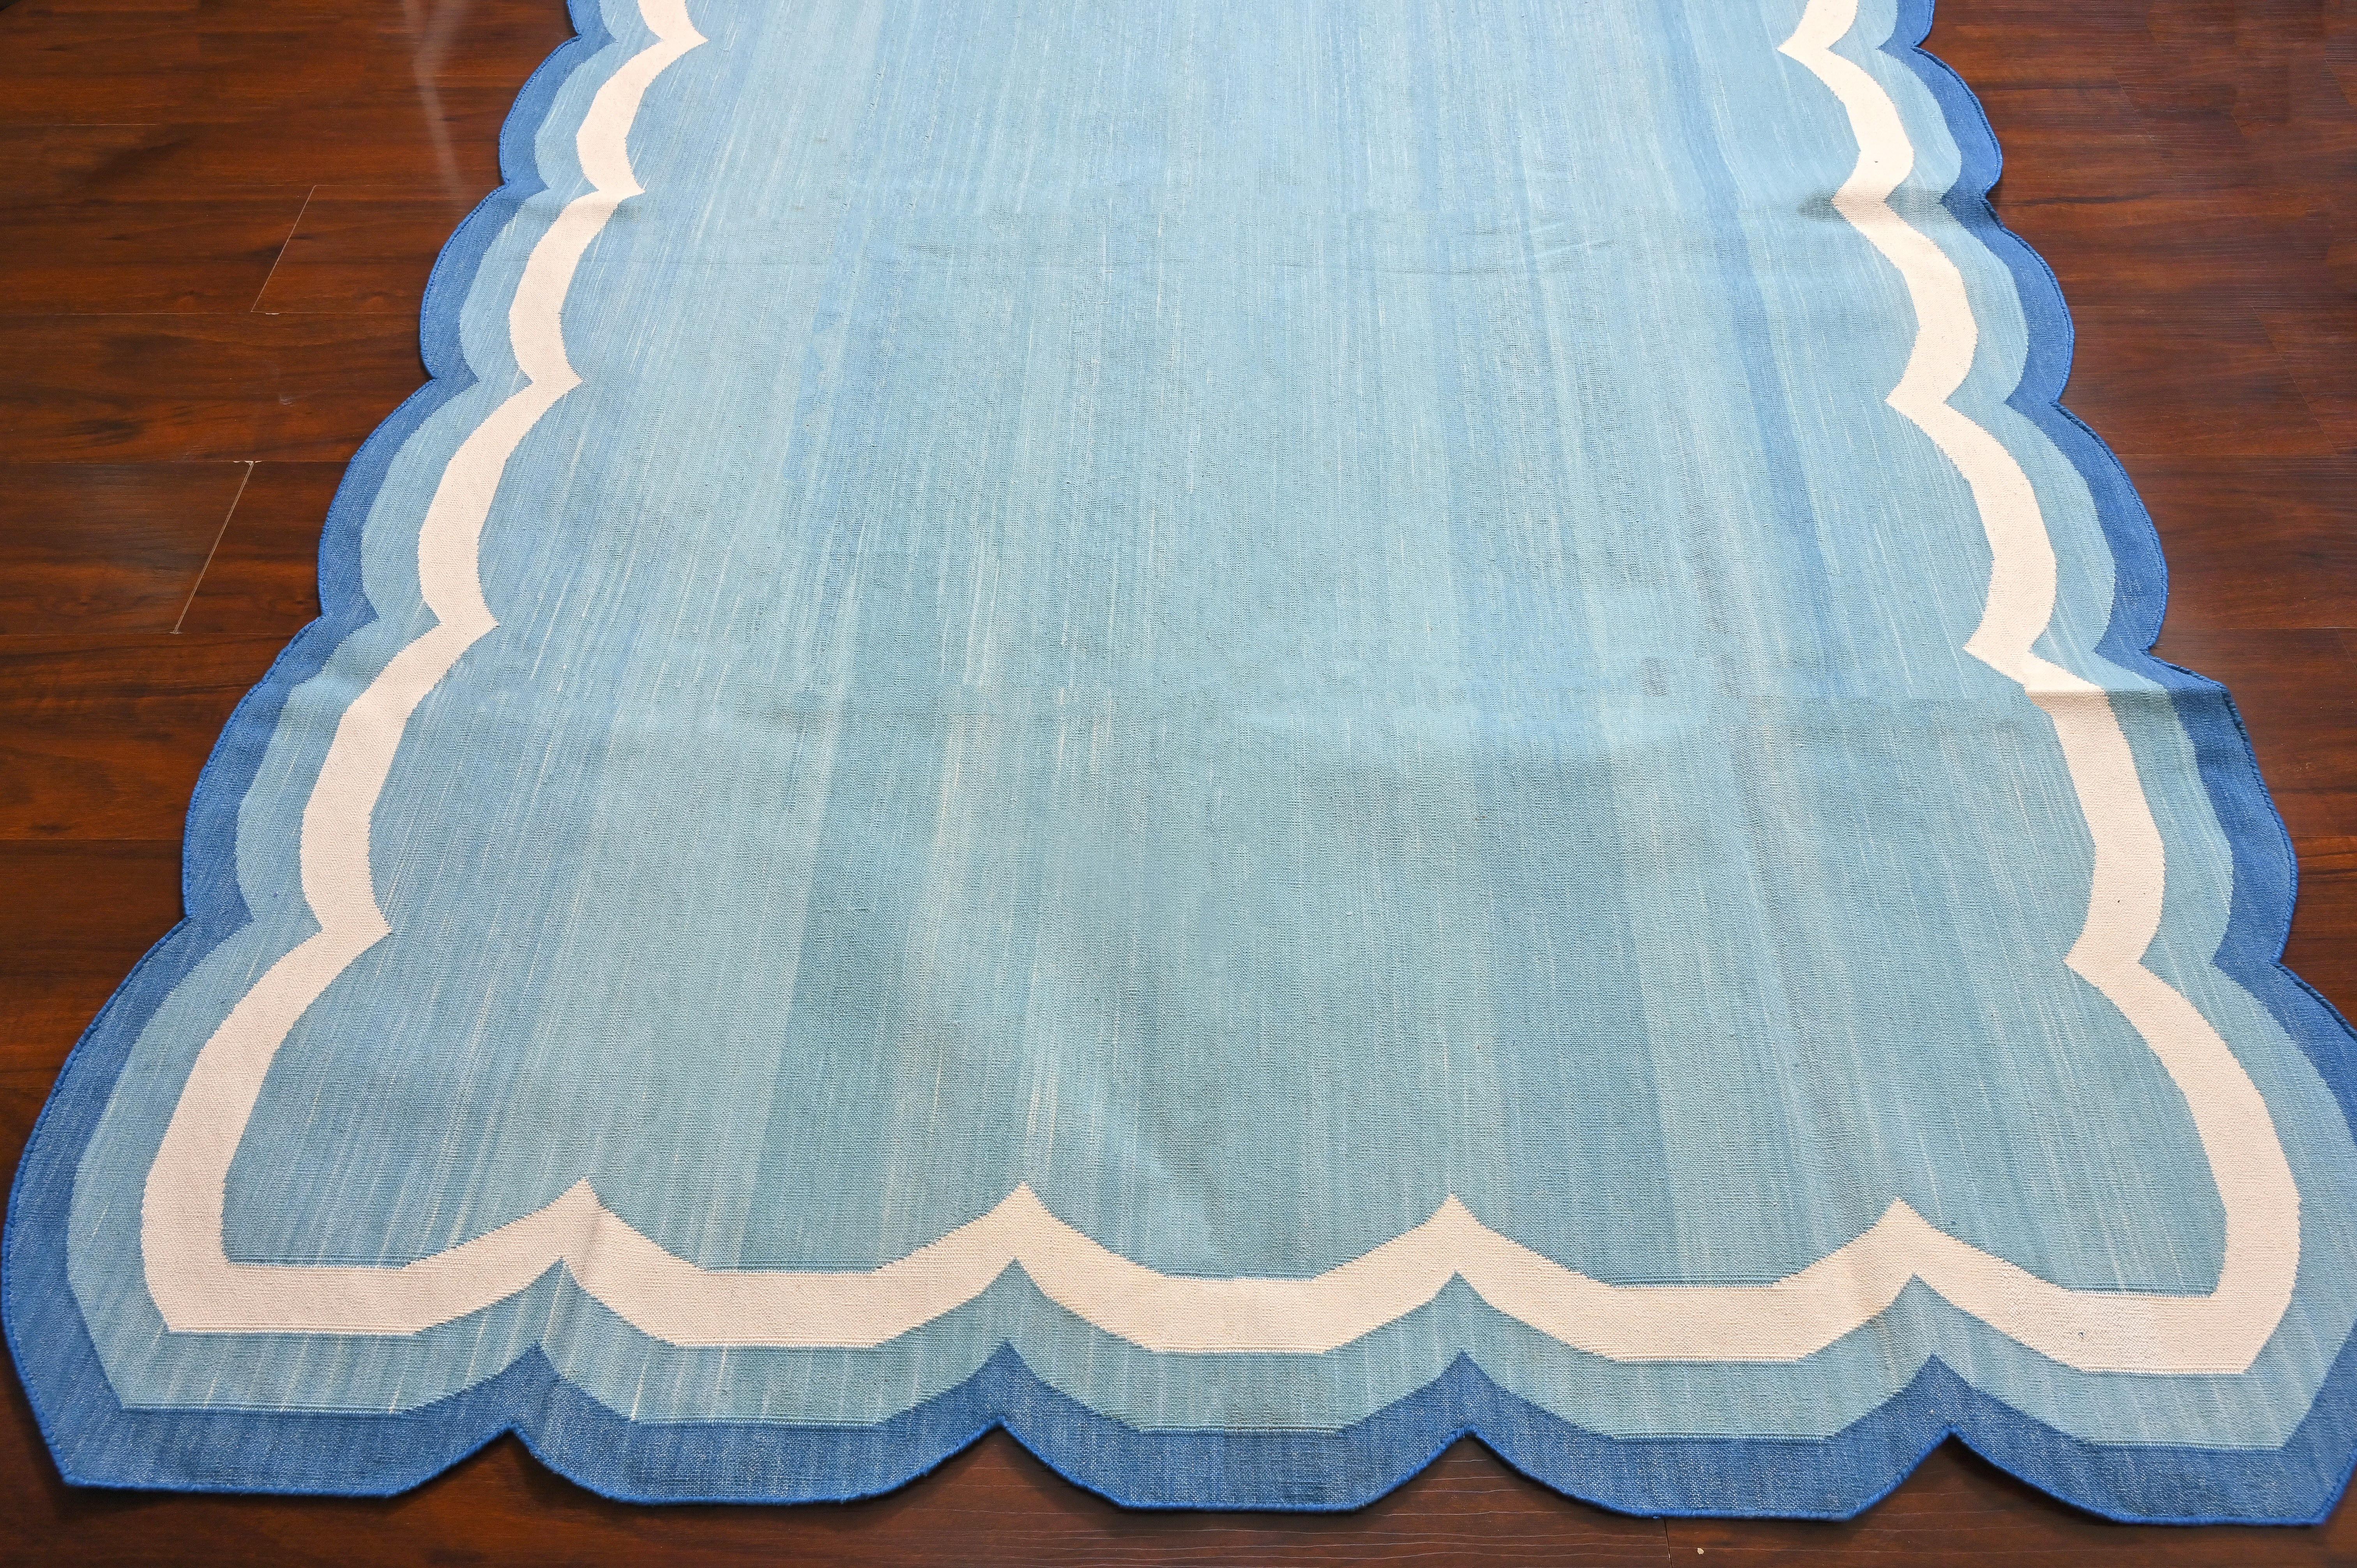 Hand-Woven Handmade Cotton Area Flat Weave Rug, Teal Blue And White Scallop Indian Dhurrie For Sale